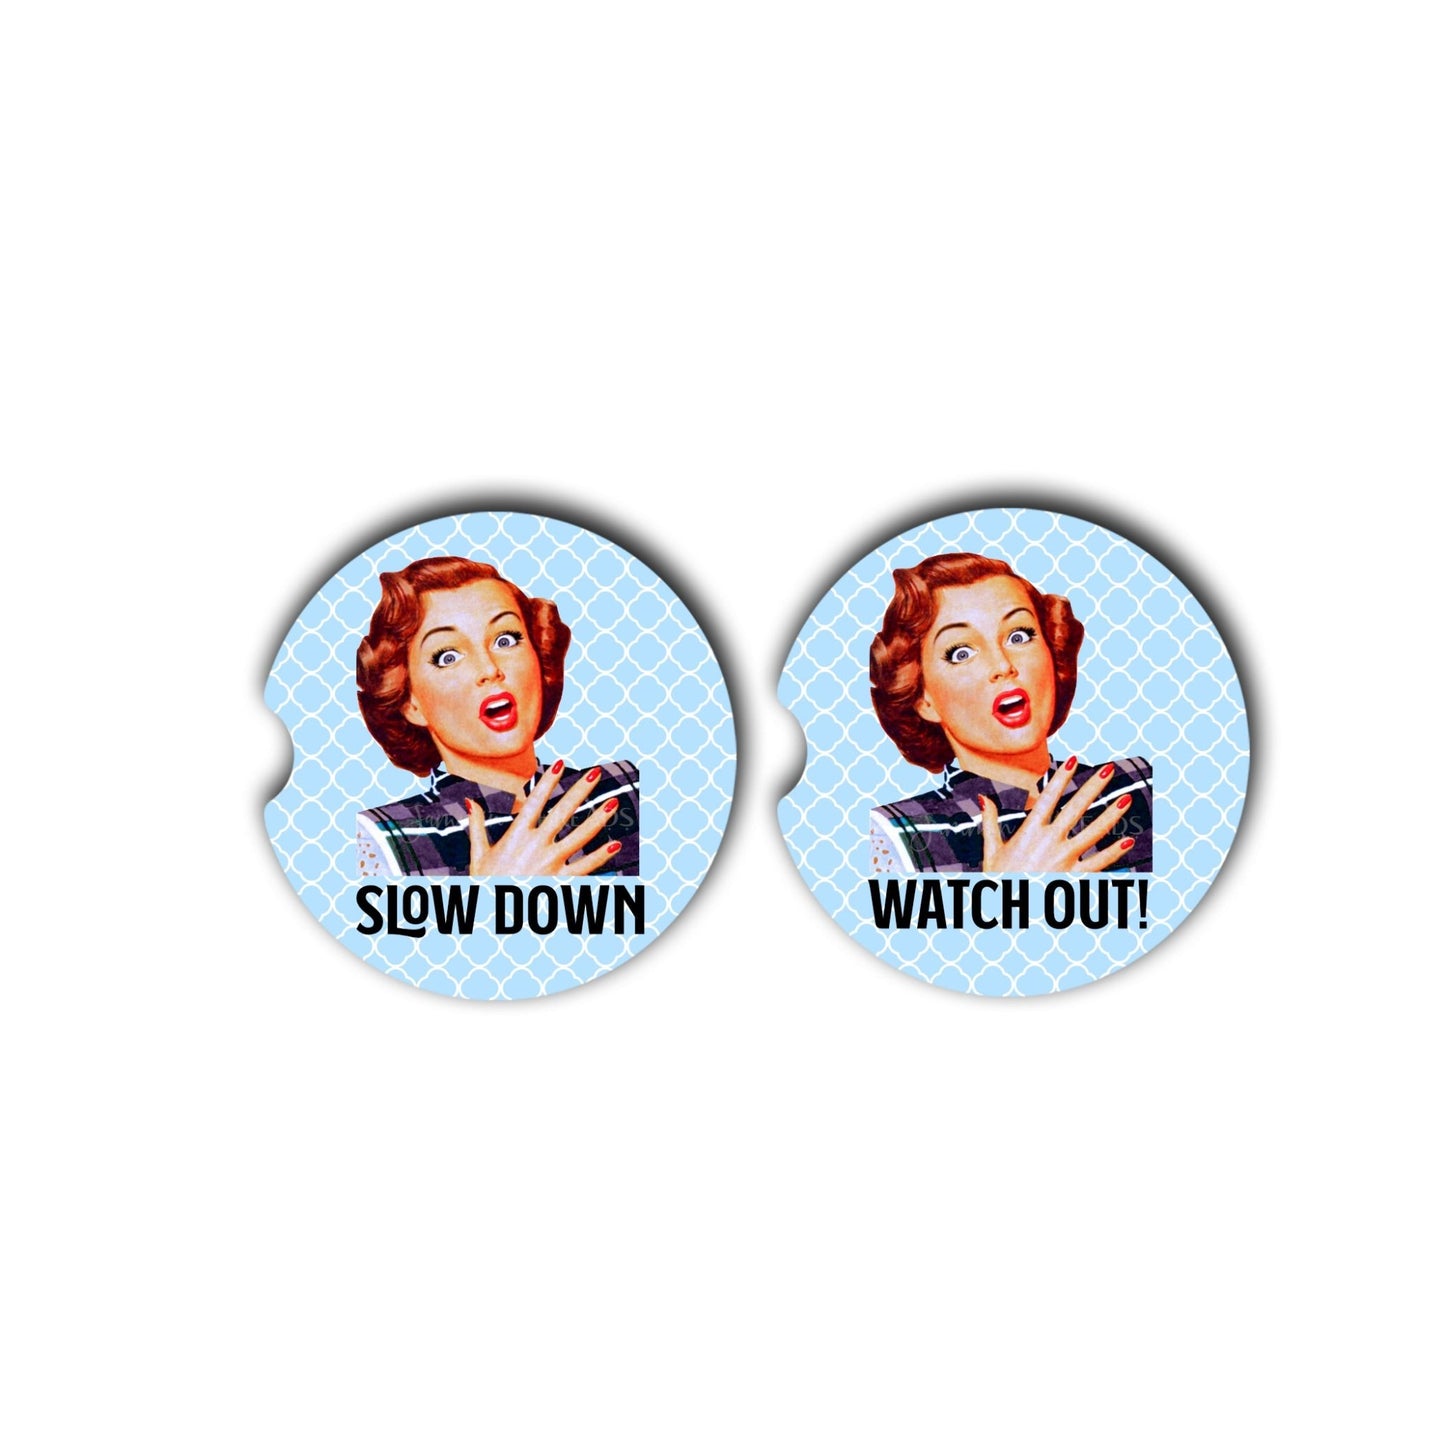 Slow Down! Watch out! - Funny retro housewife car coasters to remind your loved ones to slow down! - Jammin Threads